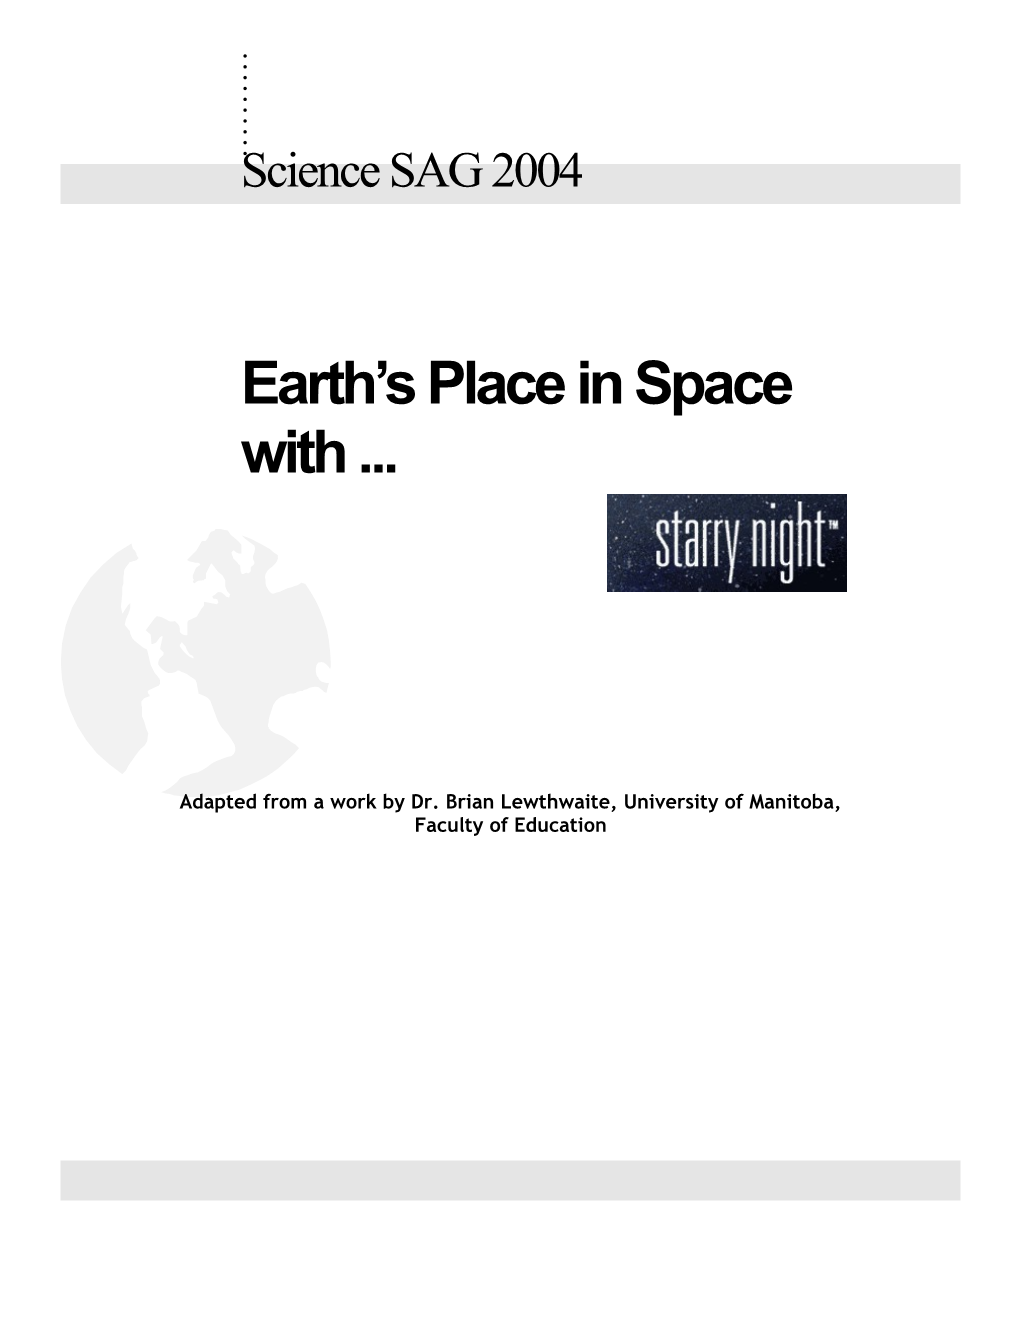 Earth S Place in Space: Reconciling First-Hand Experiences, Working with Models